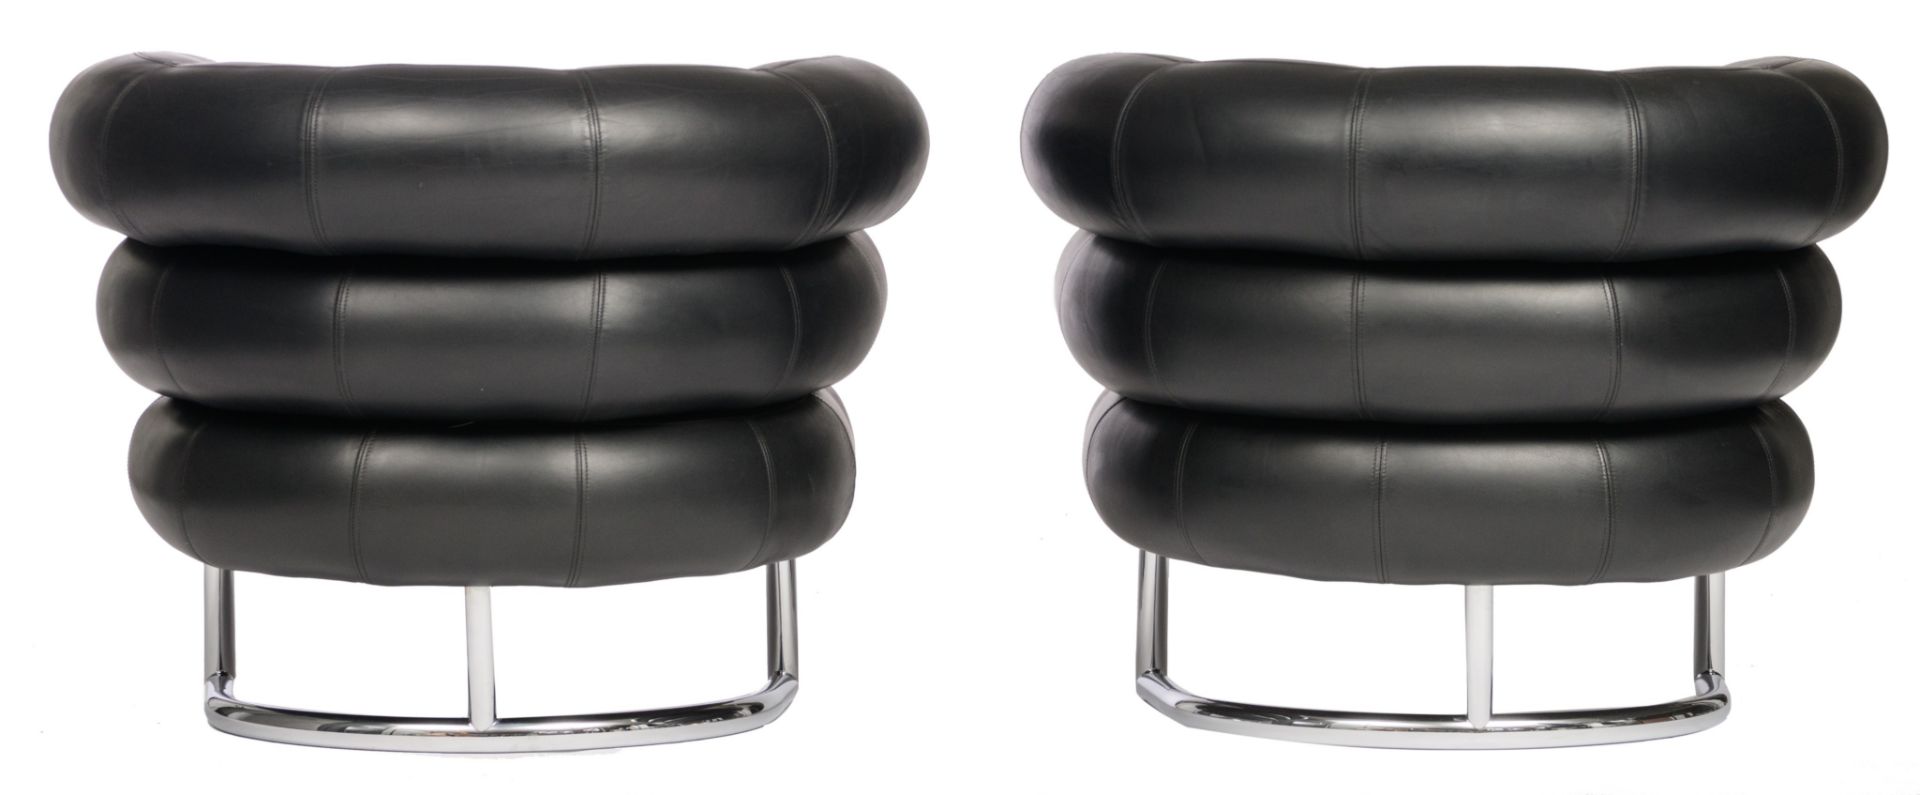 A pair of vintage 'Bibendum chair', designed by Eileen Grey in 1921, H 70 - W 92 cm - Image 4 of 9